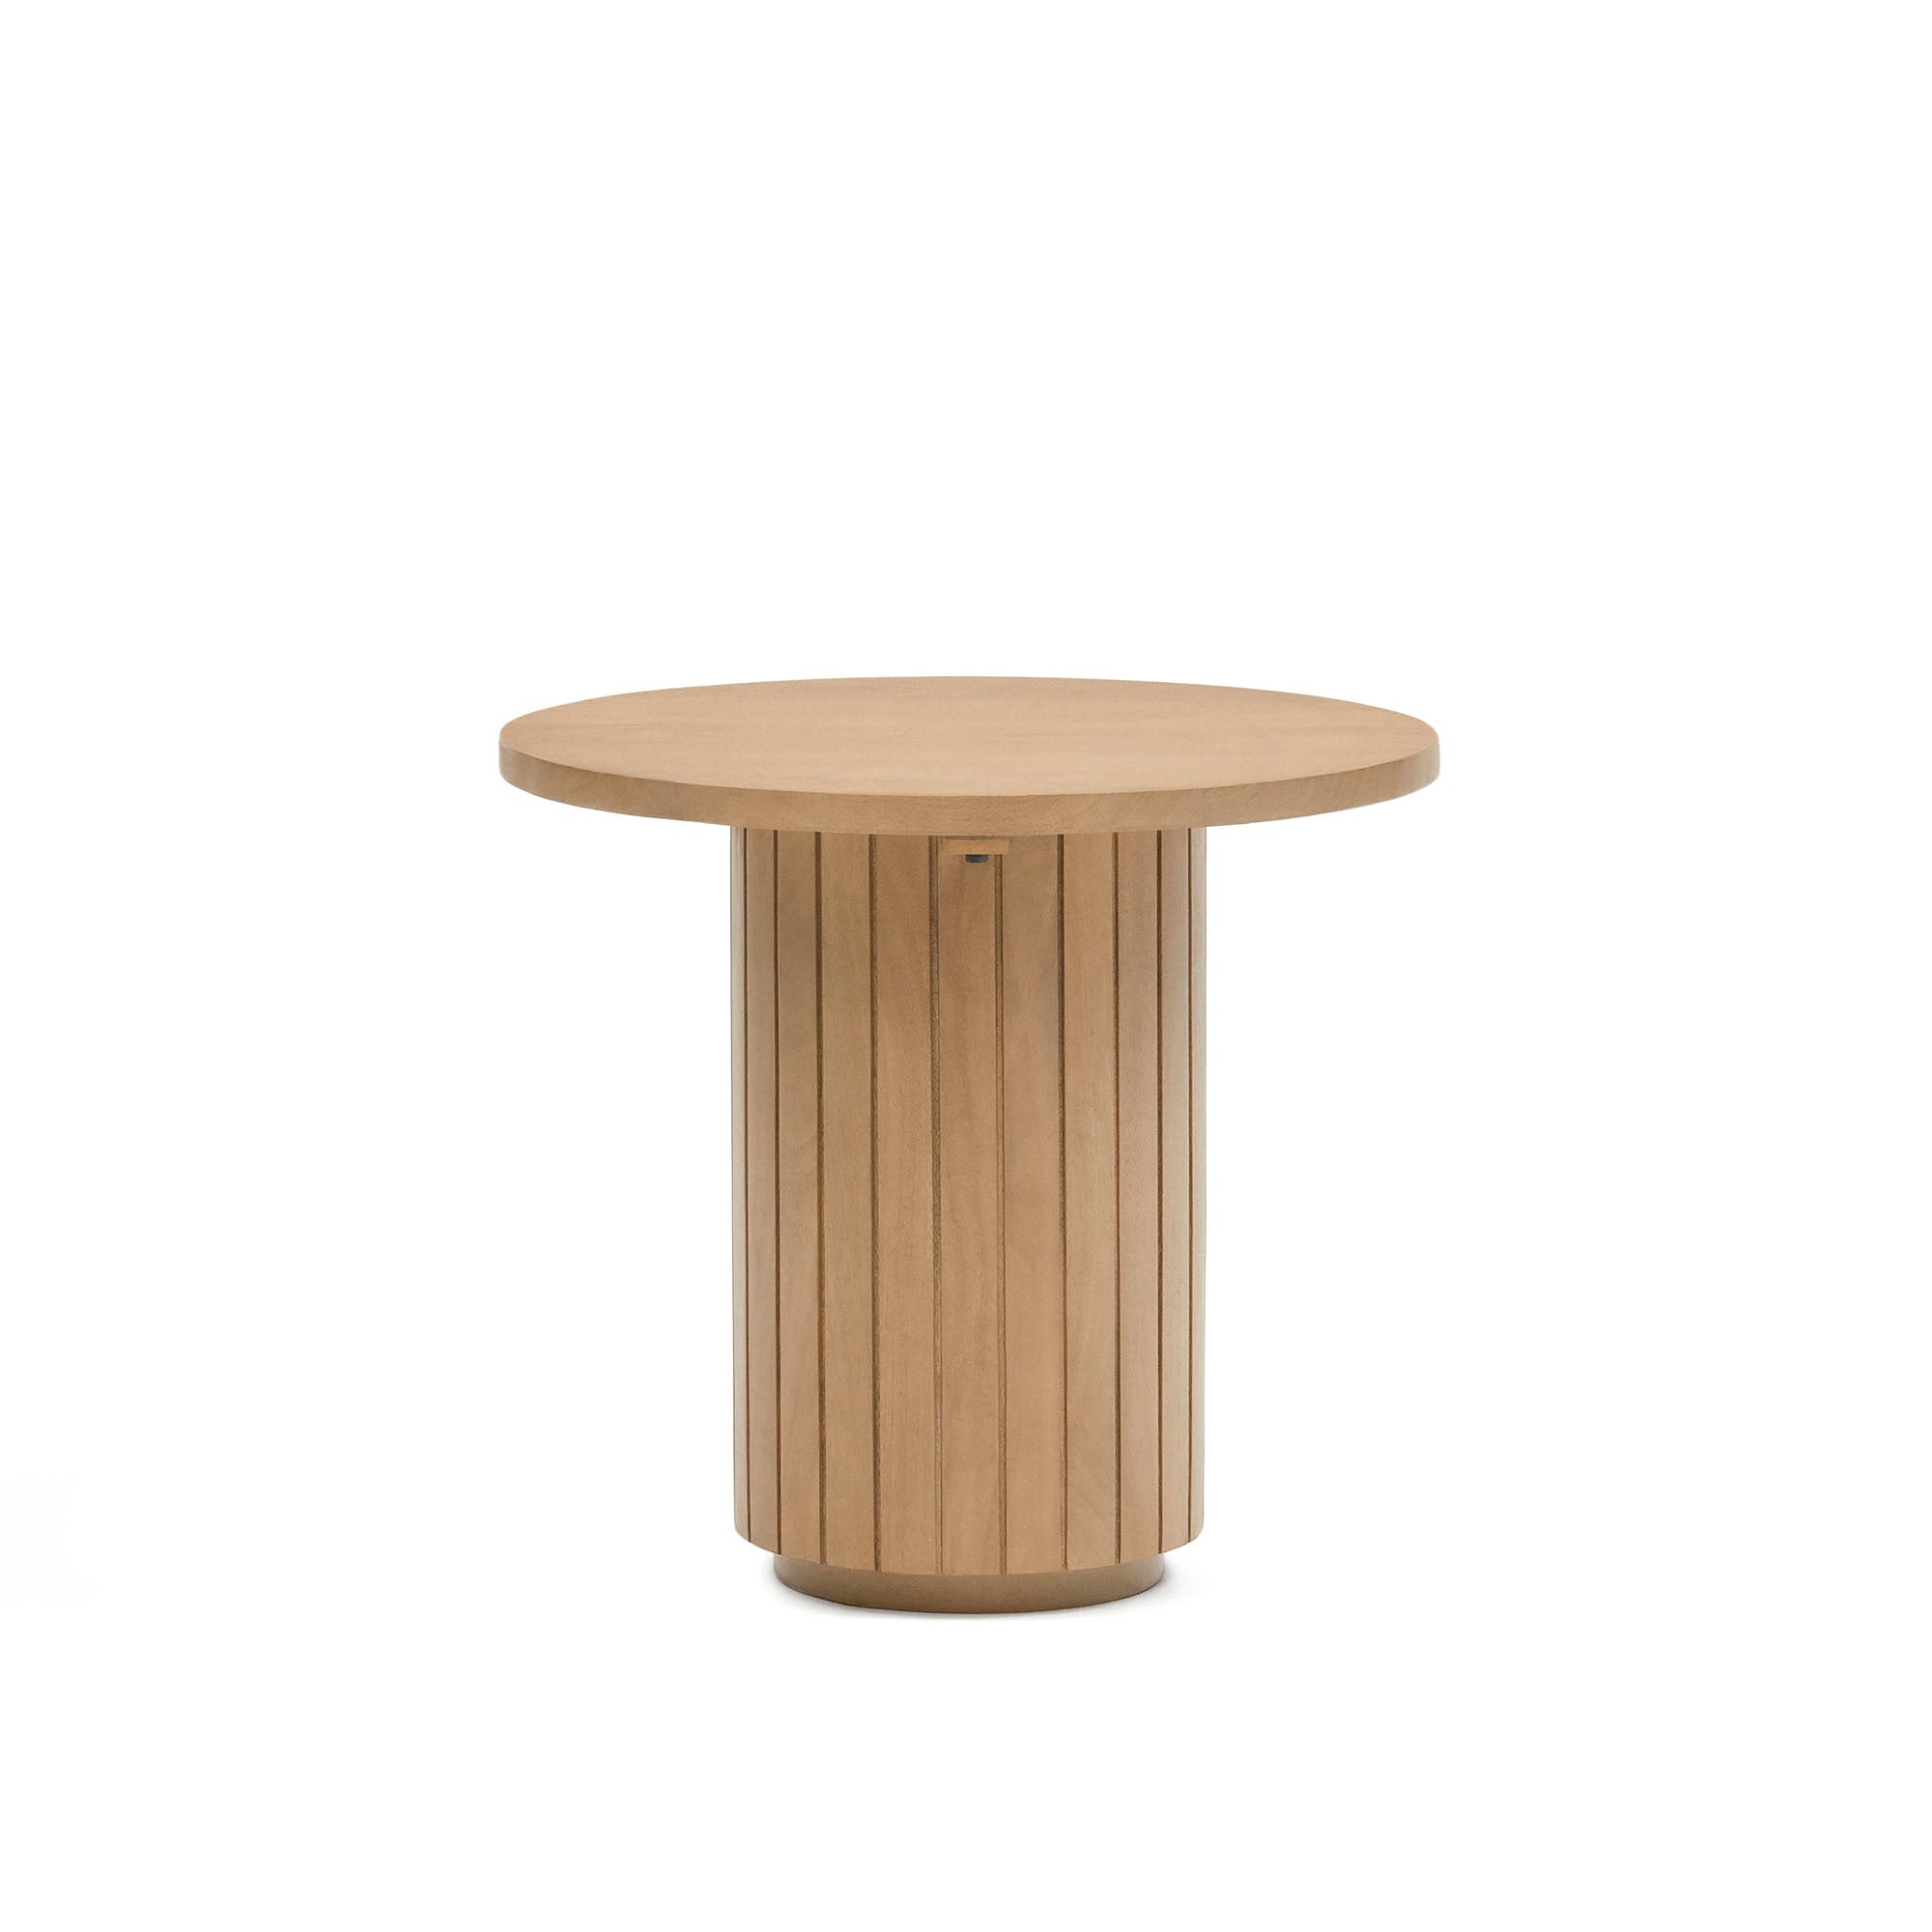 Licia round side table, solid mango wood, Ø 60 cm